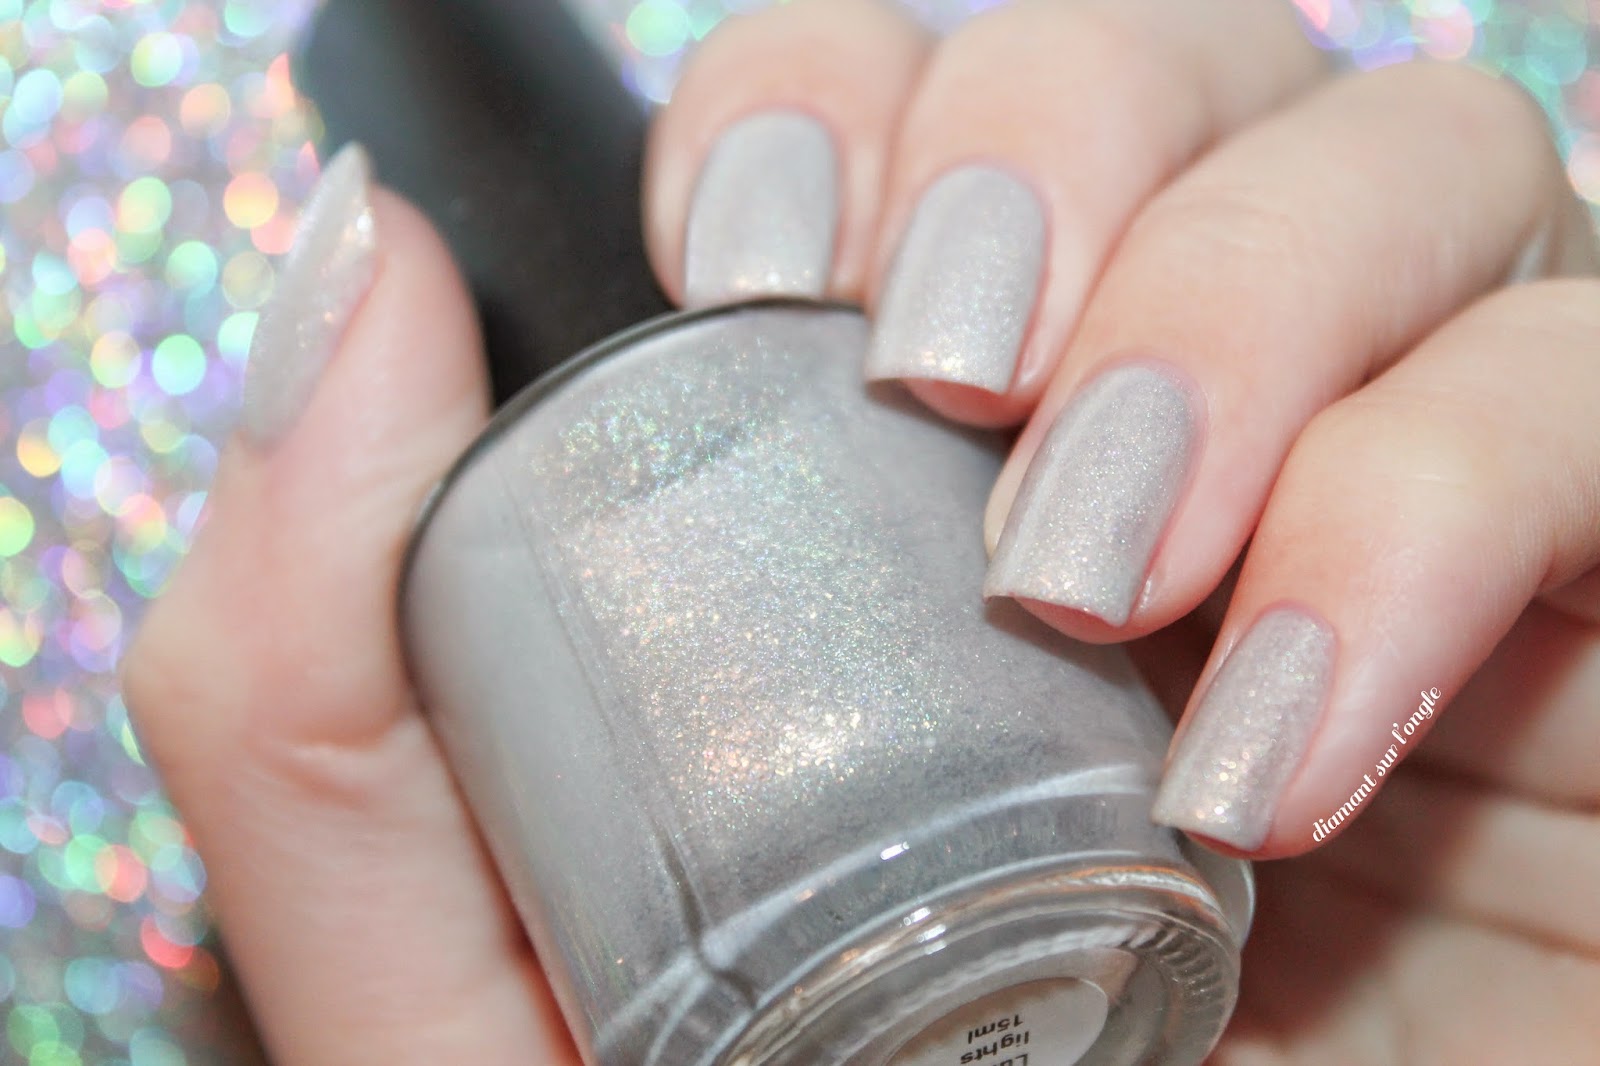 Swatch of Lunar Lights by Lilypad Lacquer